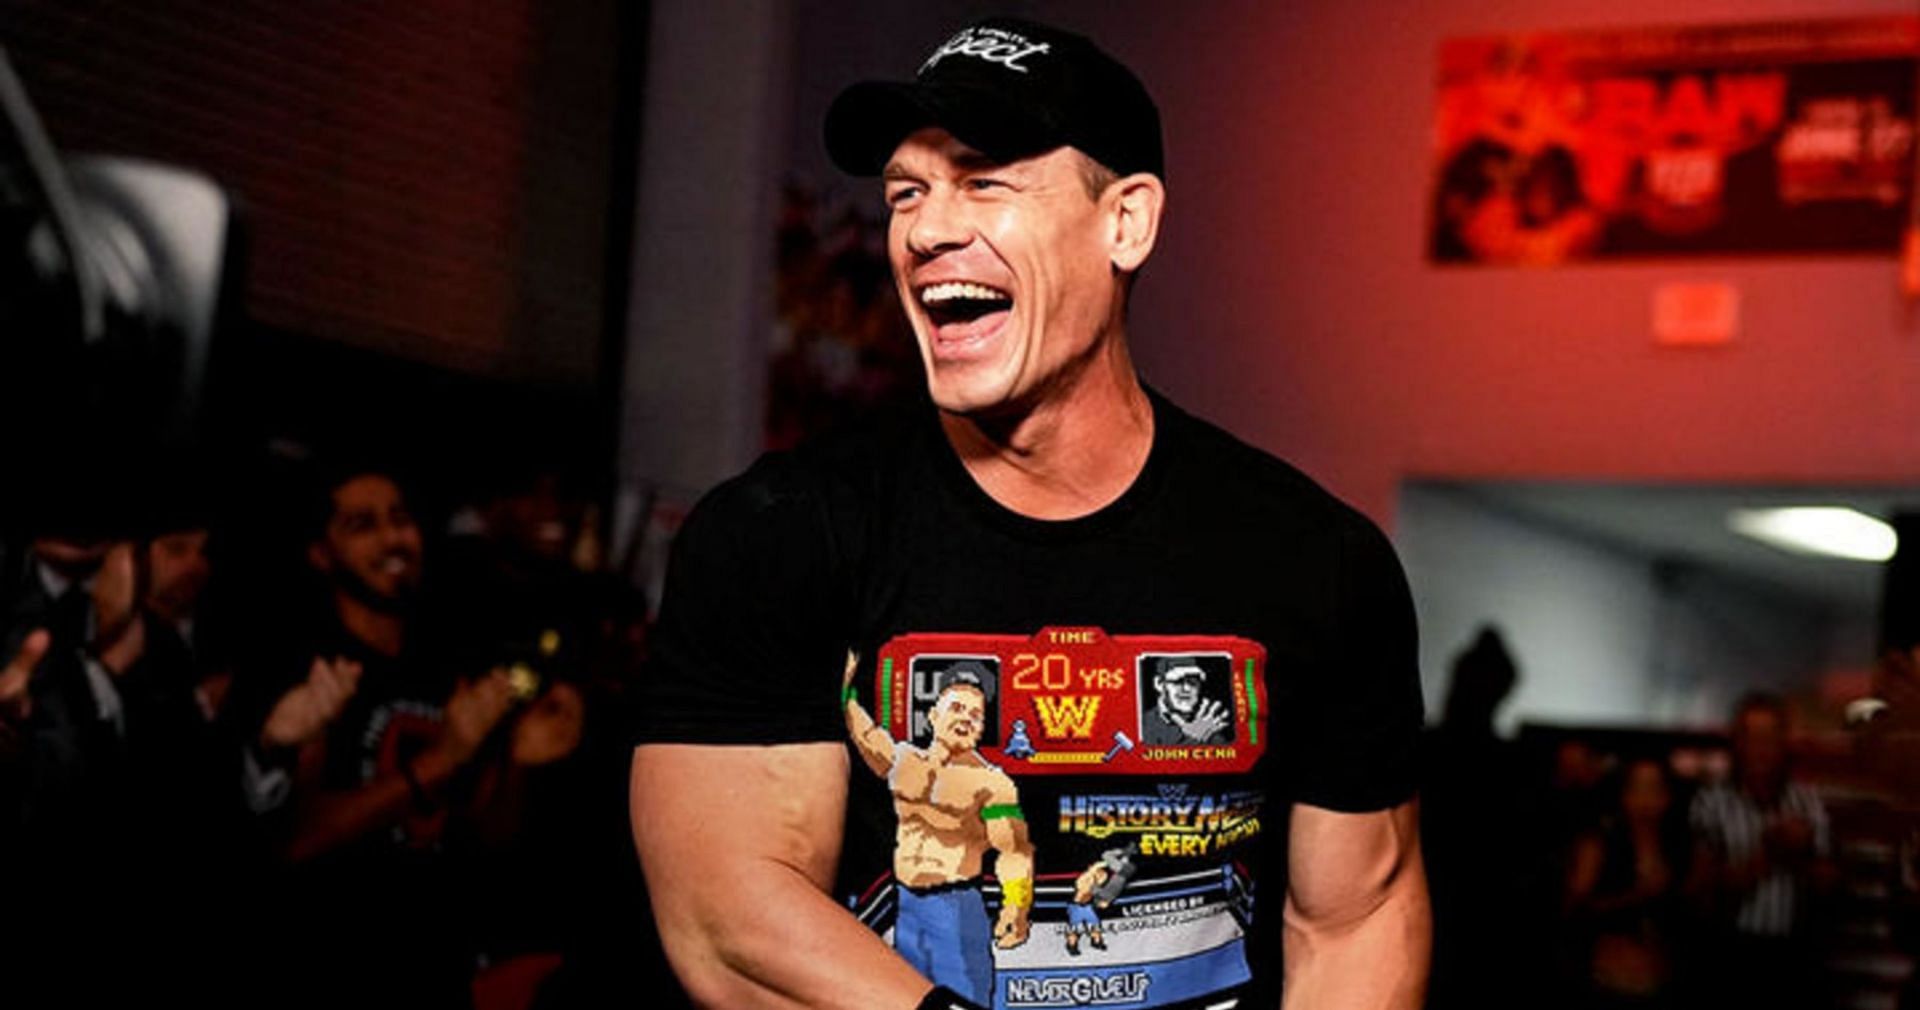 John Cena was ruthless during his promo on WWE RAW.